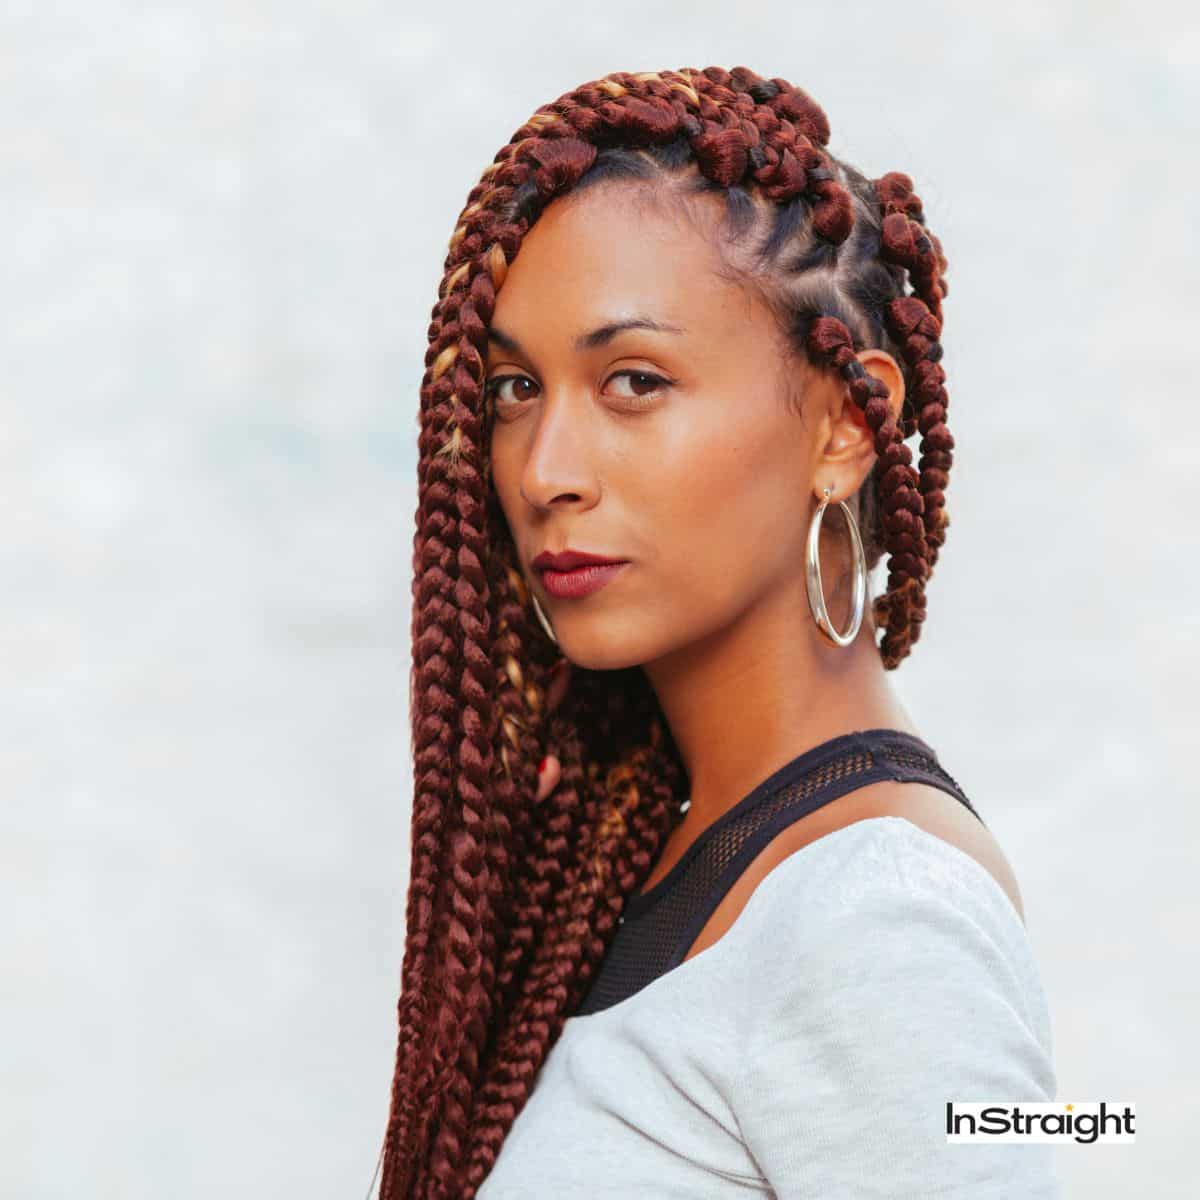 7 Popular Black Hairstyles From the '90s - InStraight